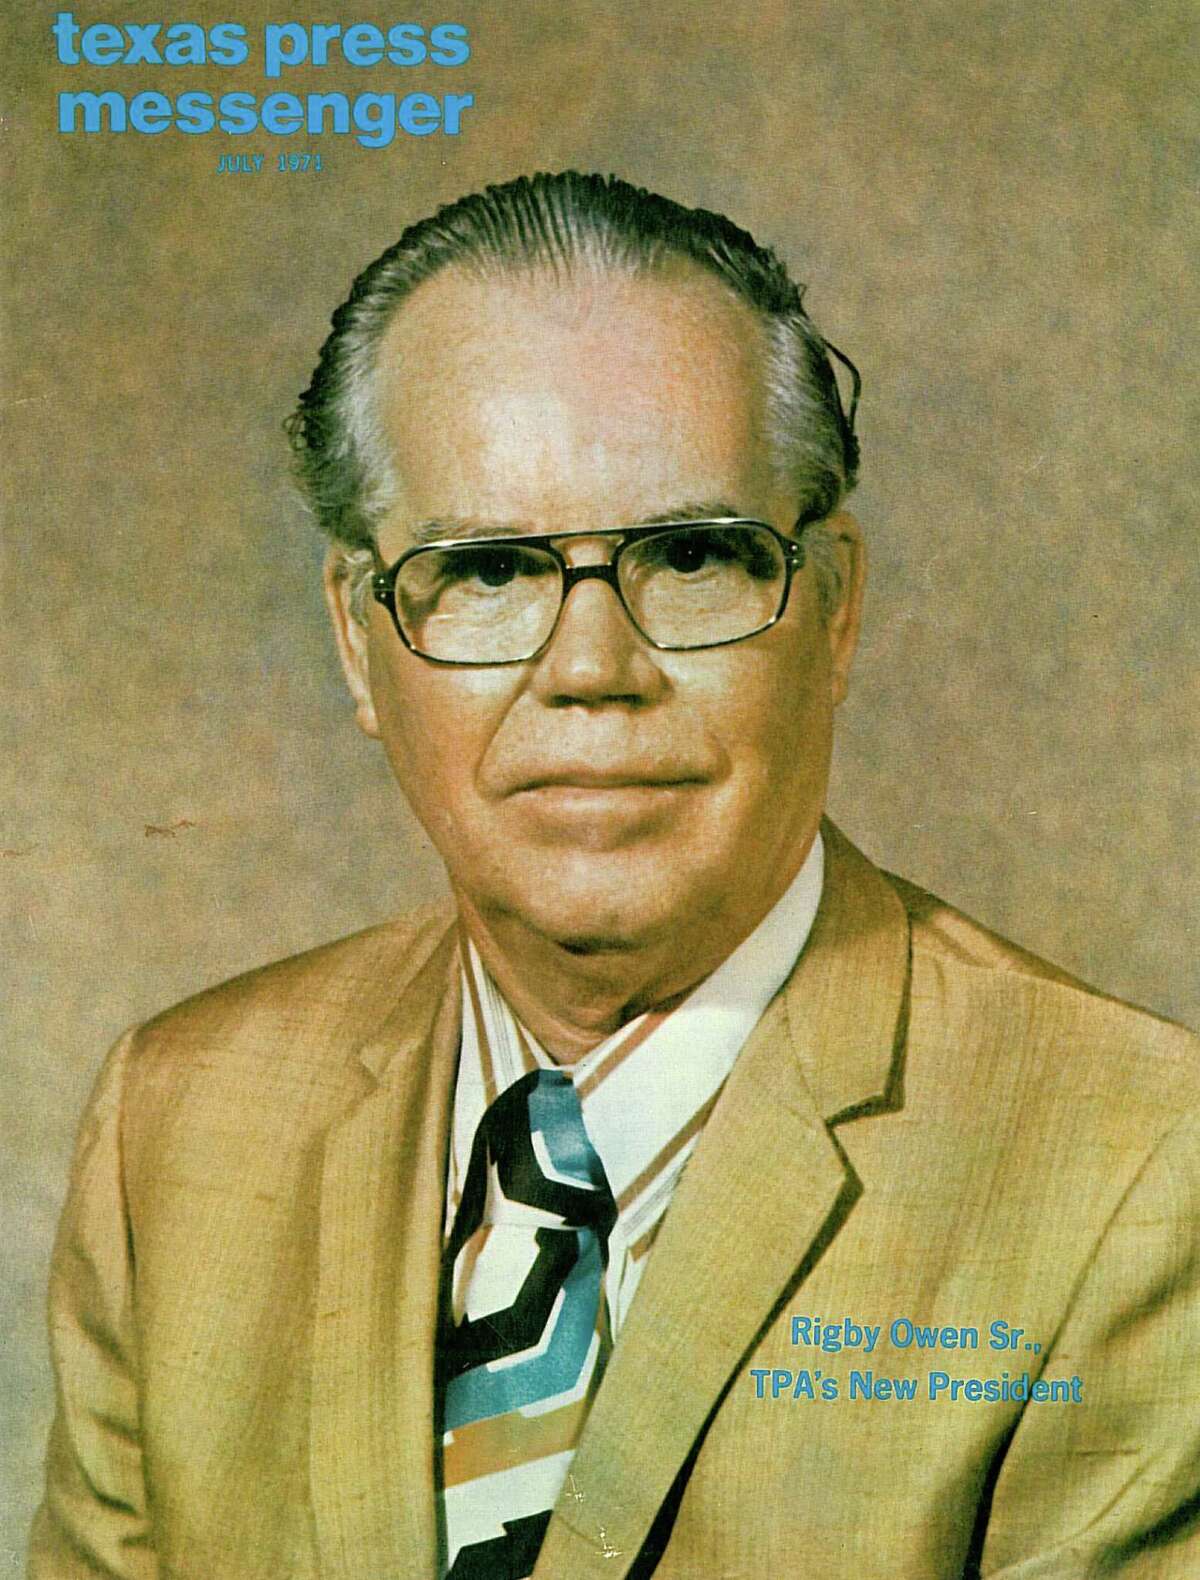 Rigby Owen Sr. and sons Steve and Rigby Jr. owned The Courier from Sept. 1, 1953 through Sept. 1, 1971. In 1971, Owen Sr. was elected as the president of the Texas Press Association.